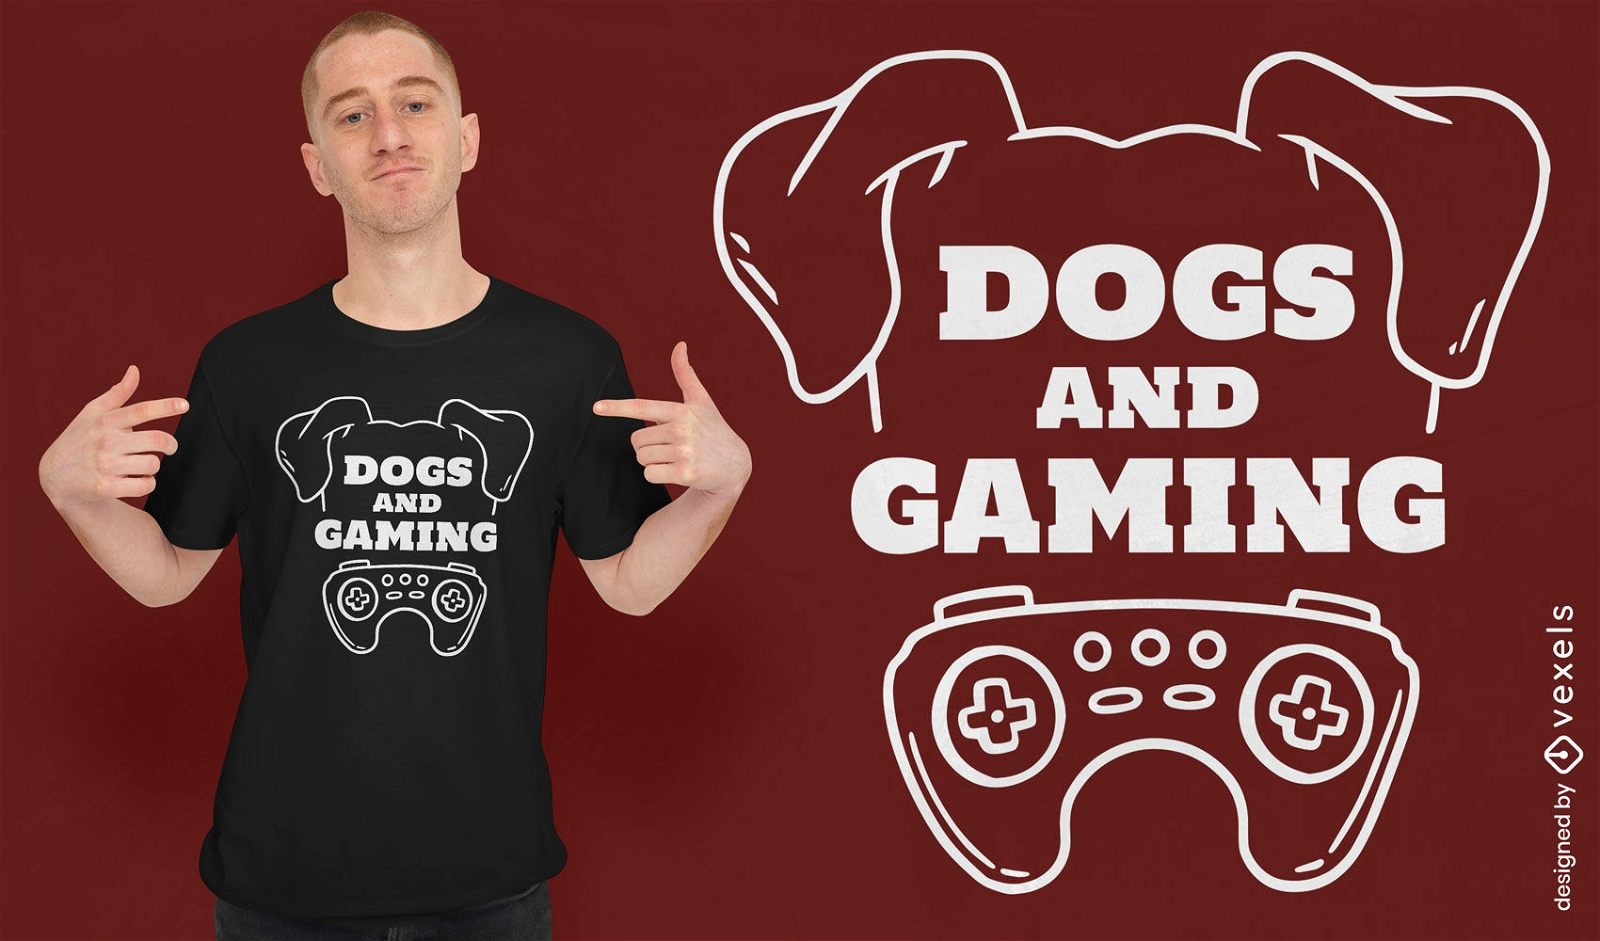 Dogs and gaming t-shirt design